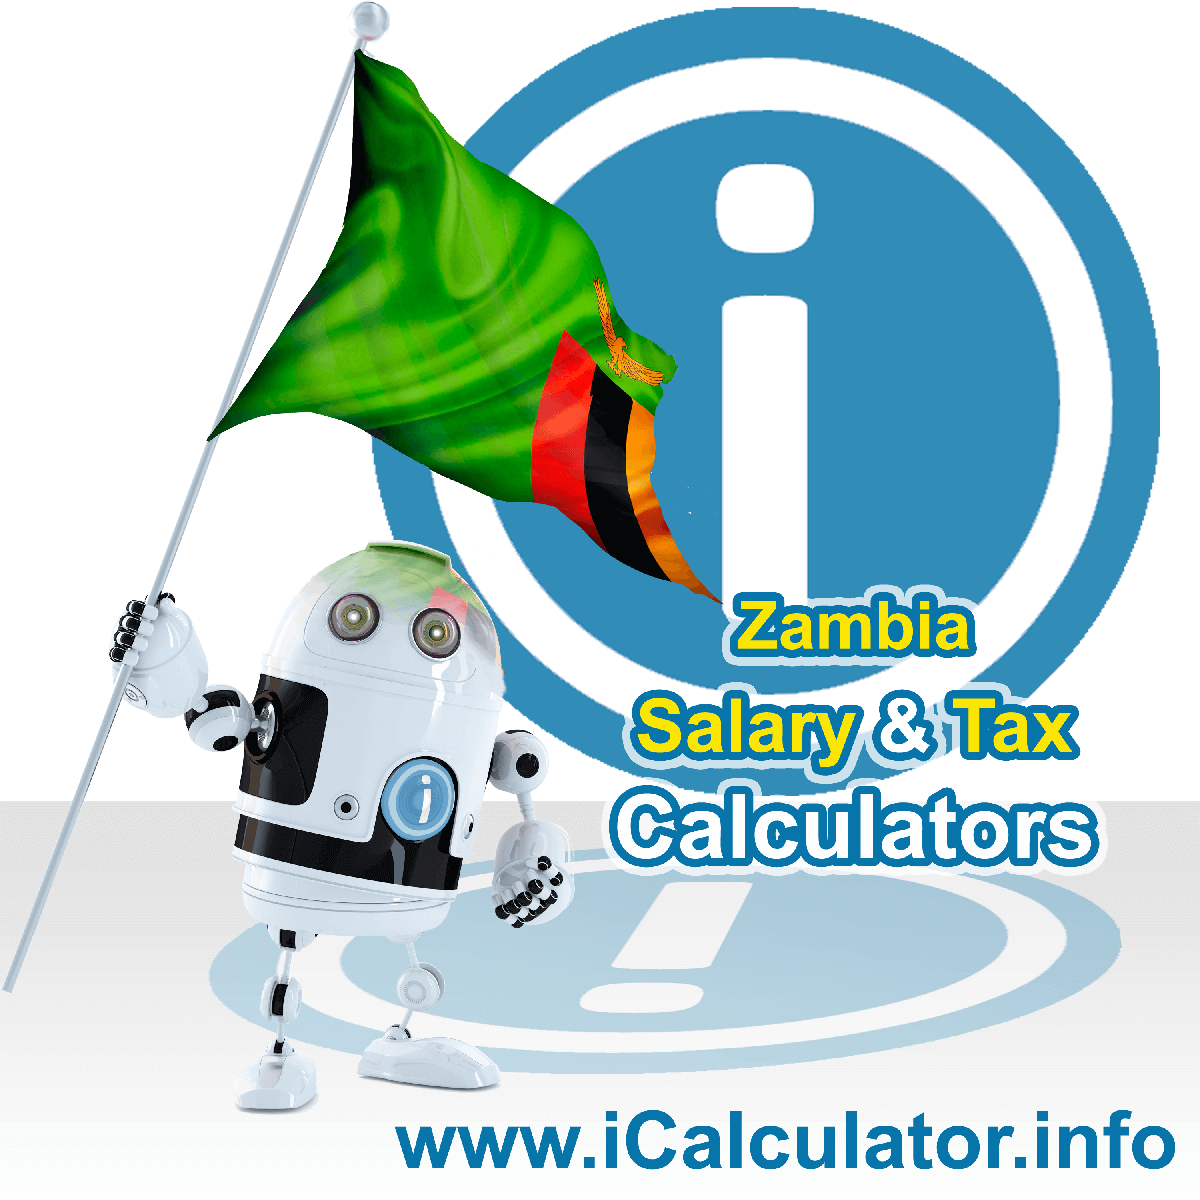 Zambia Wage Calculator. This image shows the Zambia flag and information relating to the tax formula for the Zambia Tax Calculator